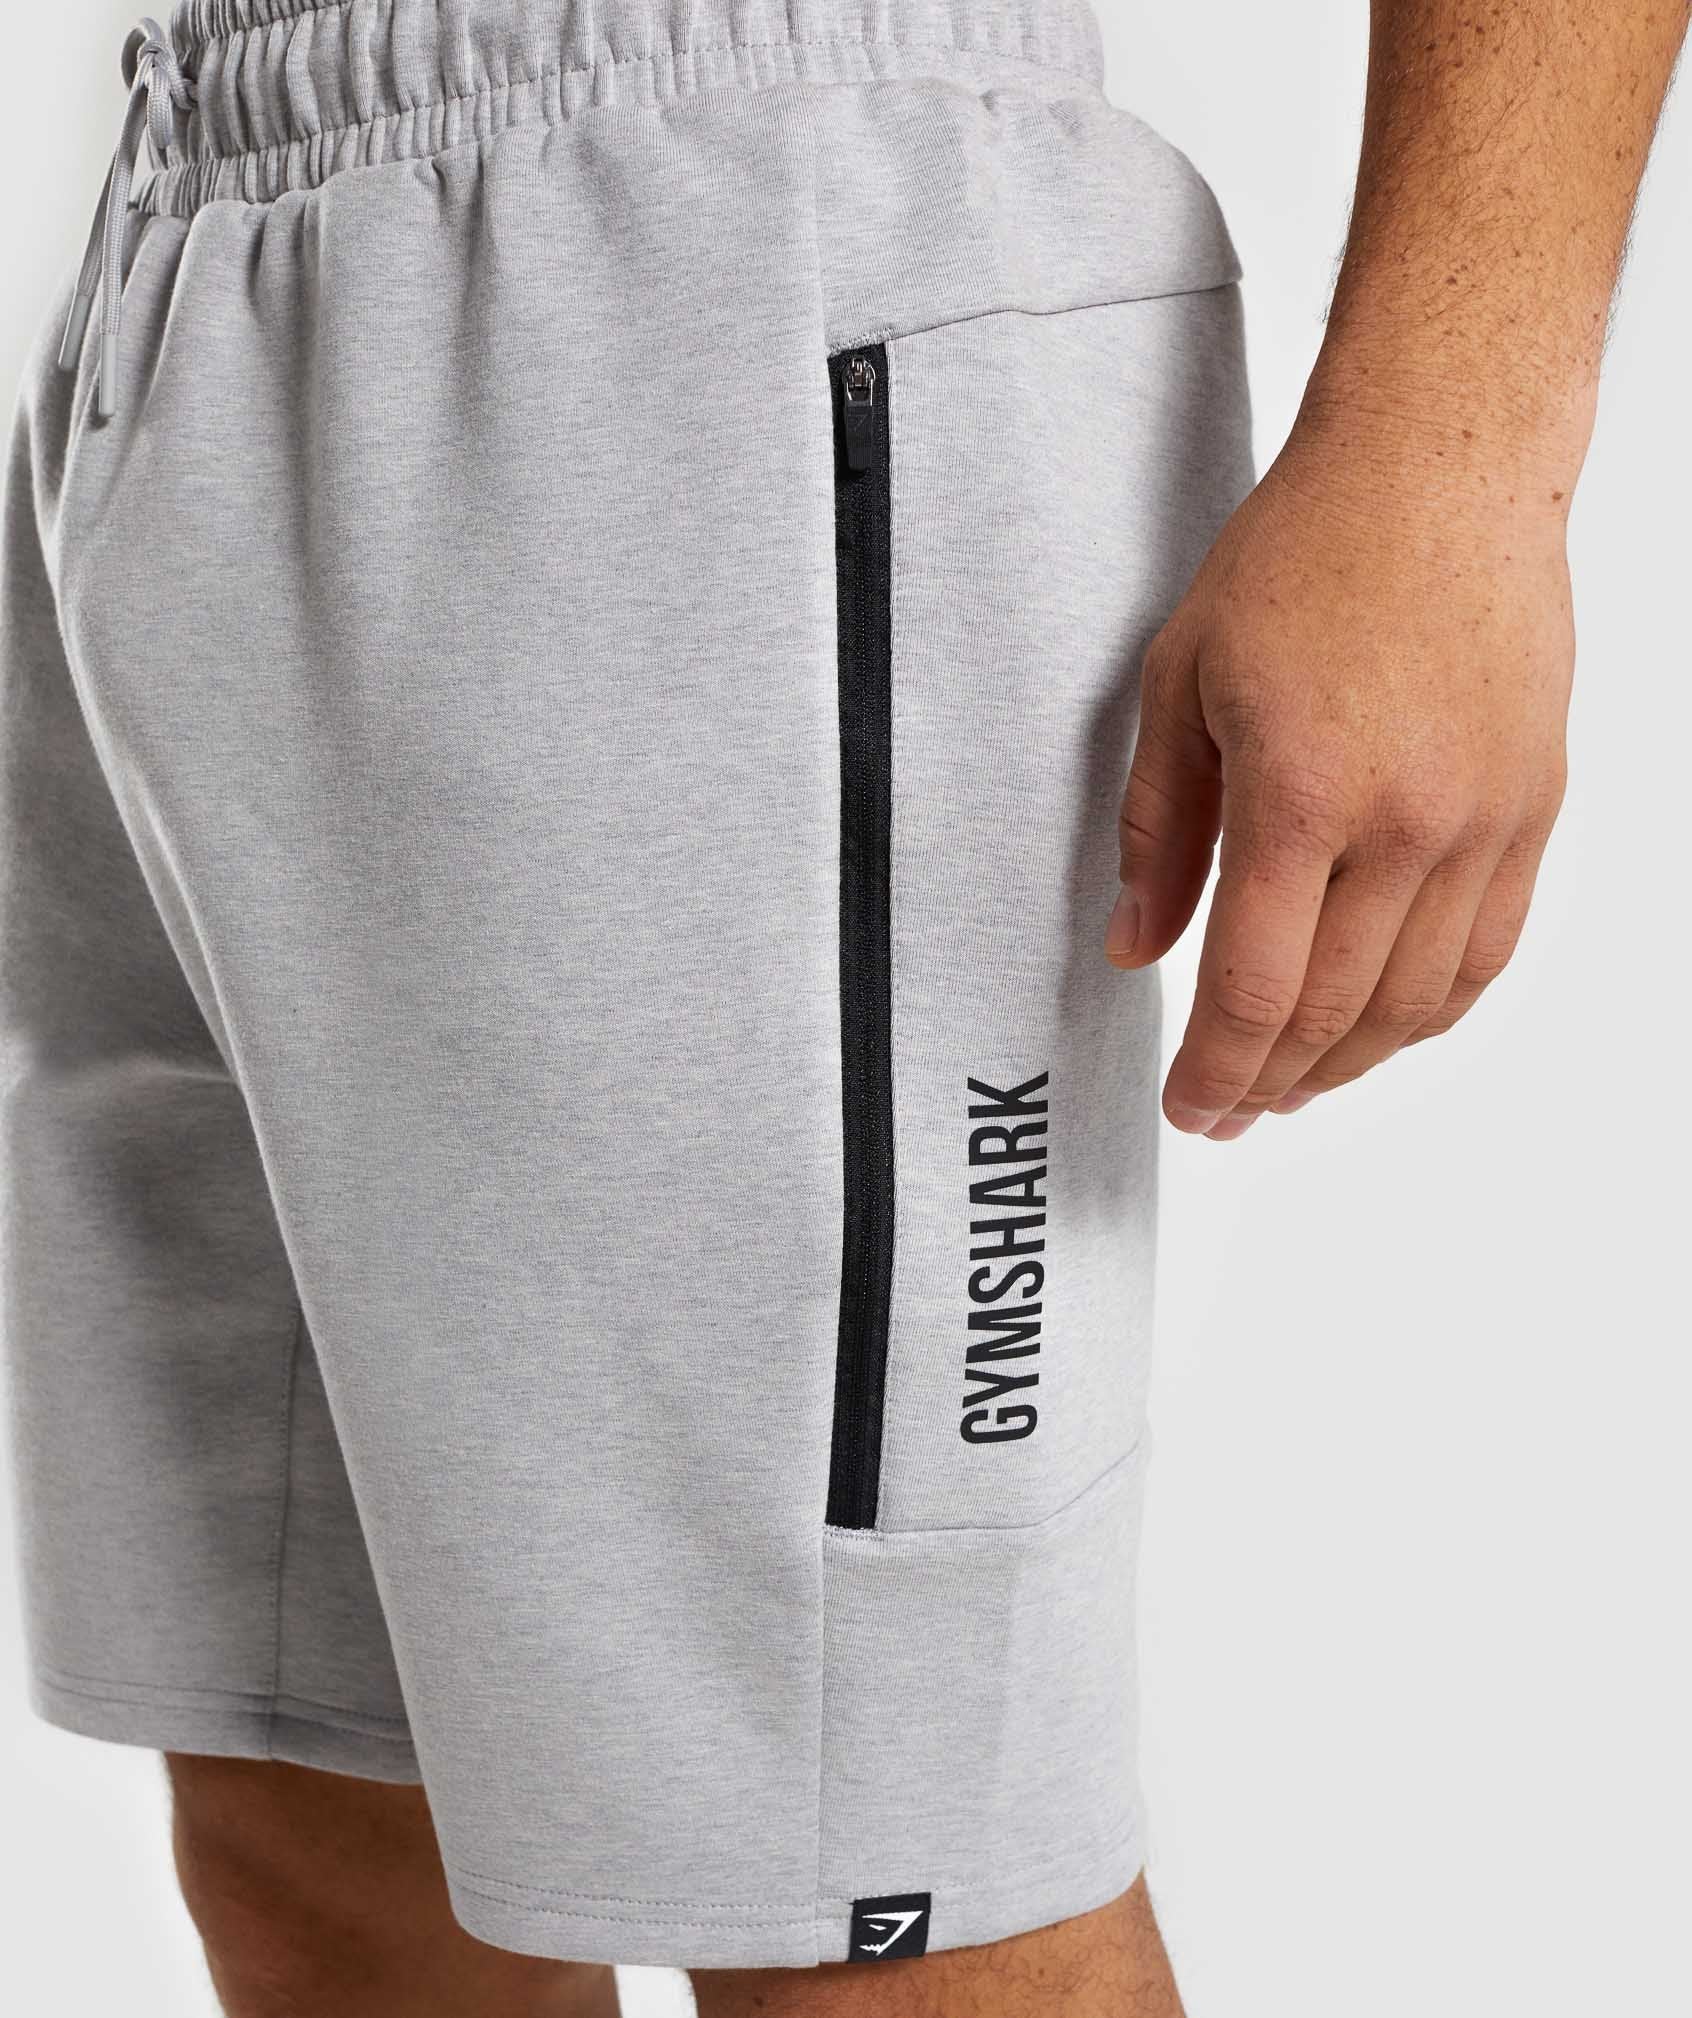 Ultra Shorts in Light Grey Marl - view 5